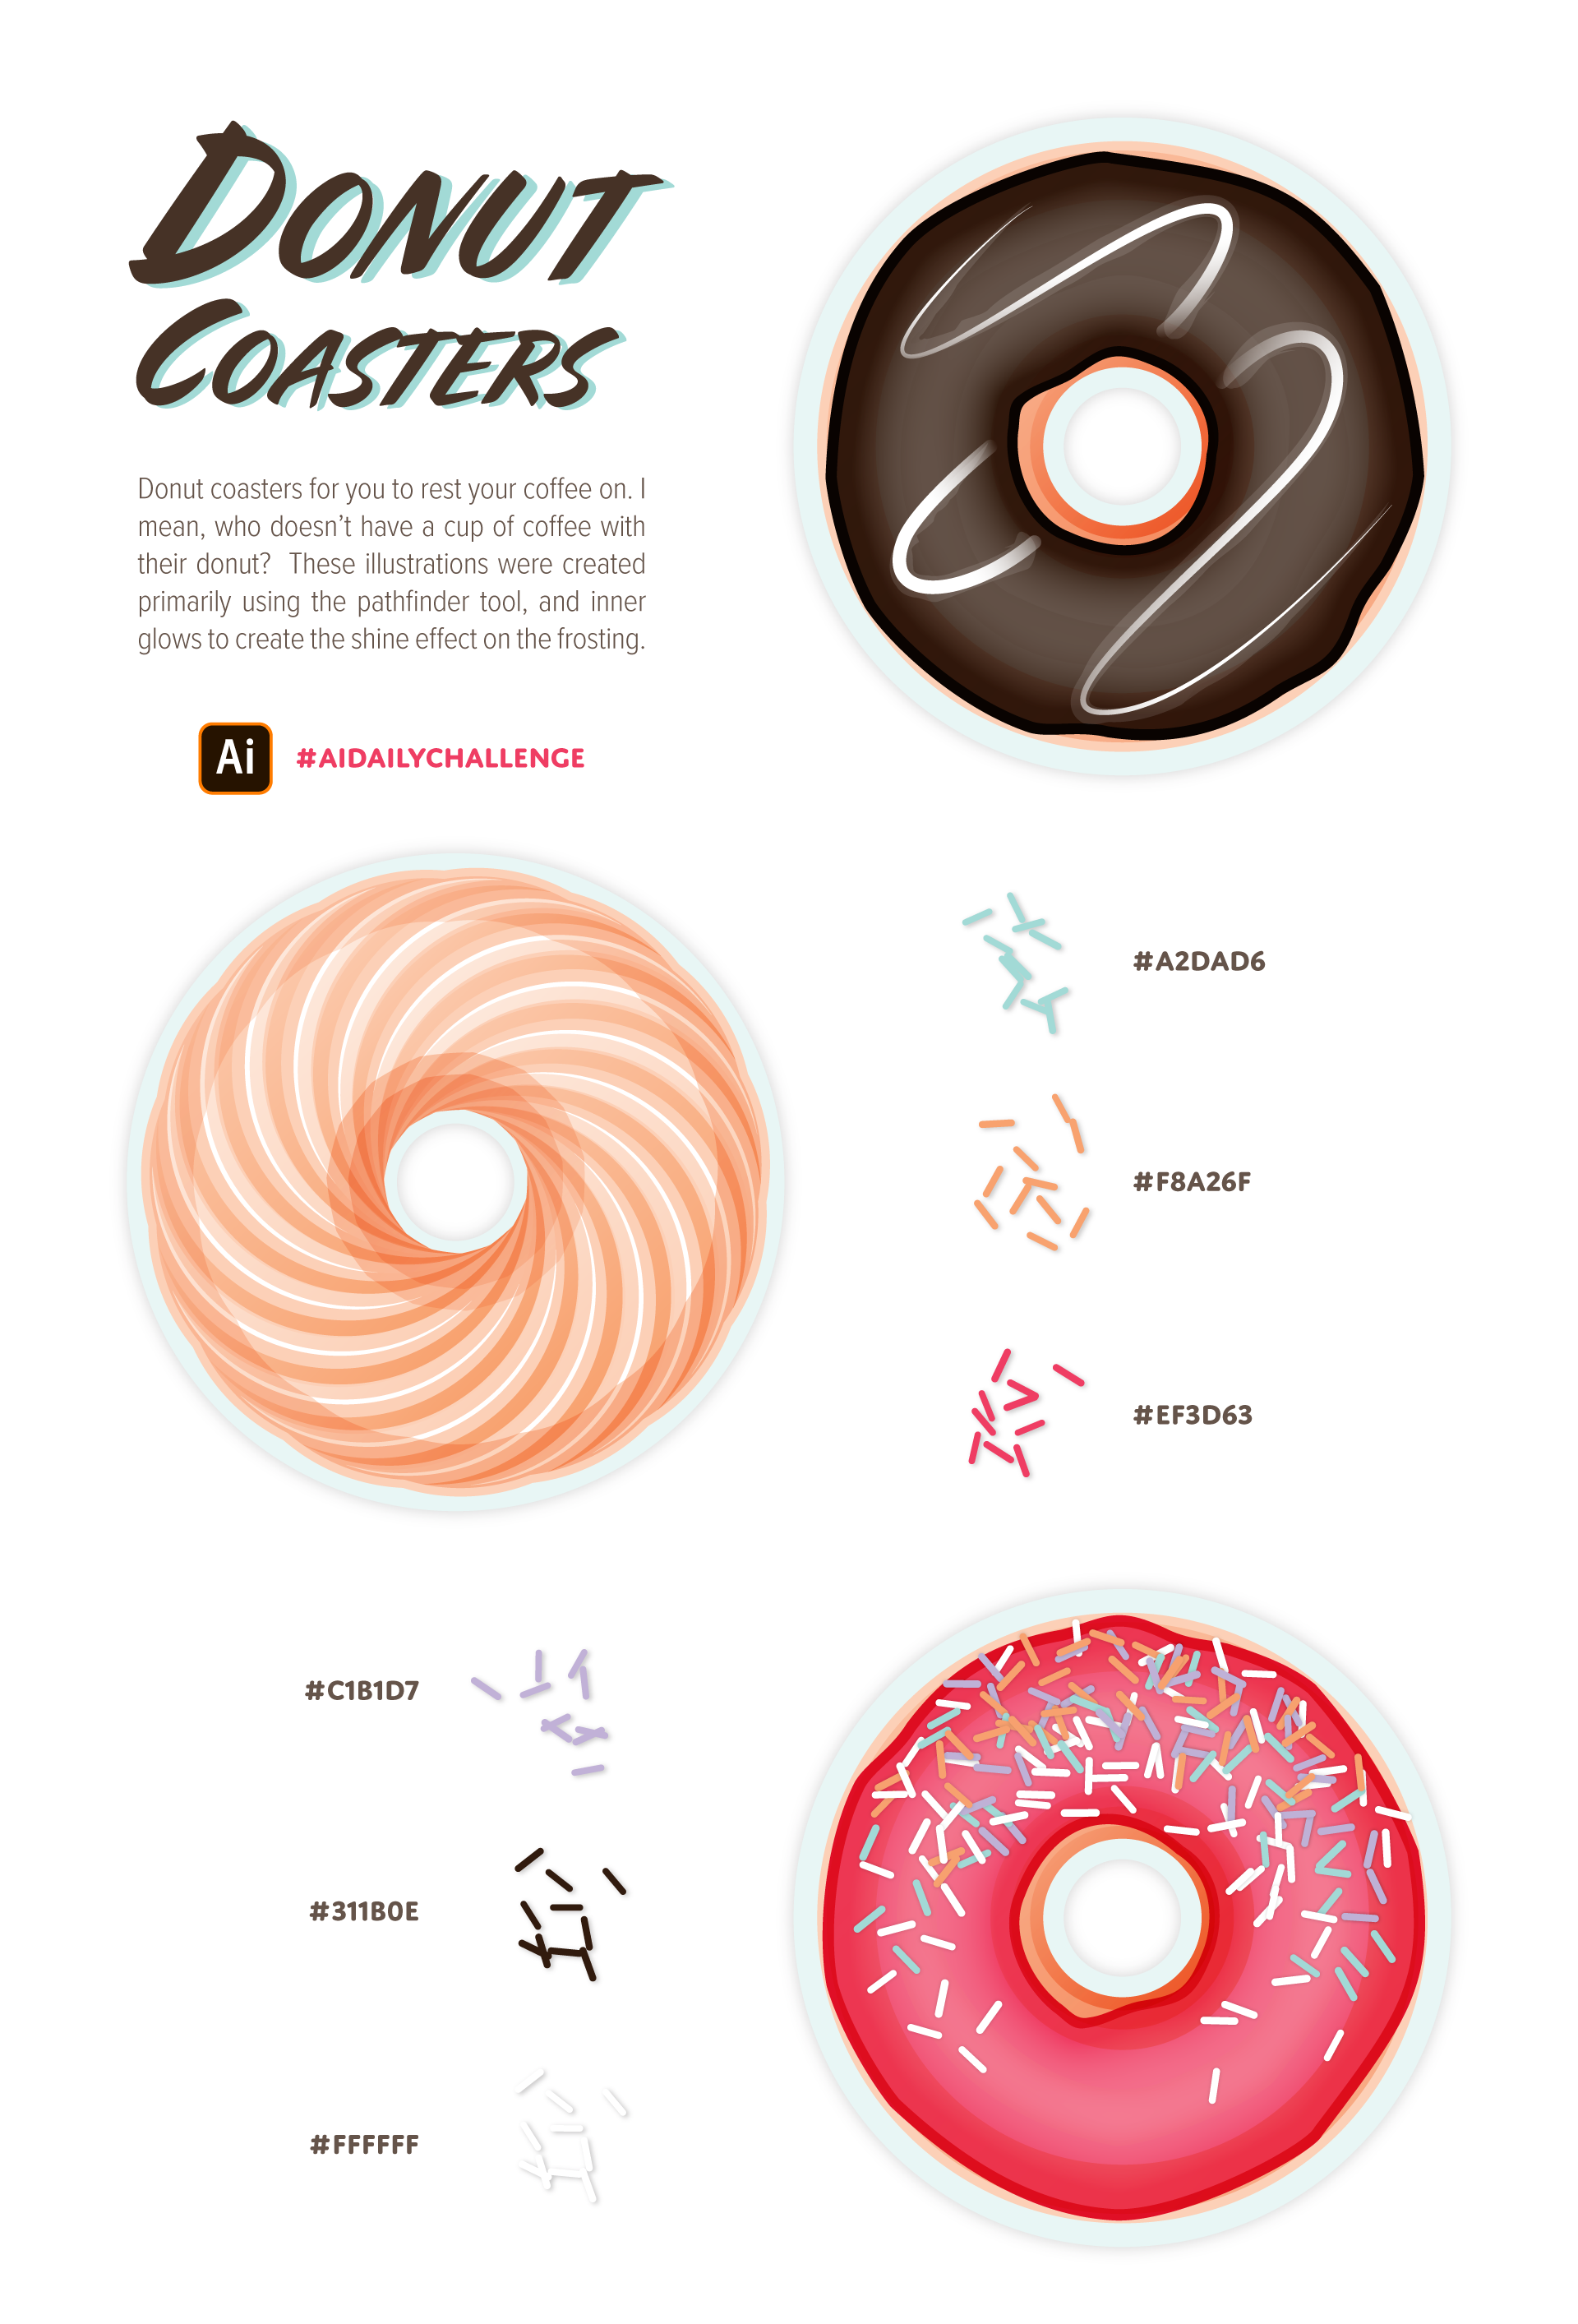 Donut Coasters for you to rest your coffee on. I mean, who doesn't have a cup of coffee with their donut? These illustrations were created primarily using the pathfinder tool, and inner glows to create the shine effect on the frosting.

Pictured: 3 donuts, chocolate frosted with a white drizzle, cruller (with a Spirograph-like design), and a classic pink frosted with sprinkles.